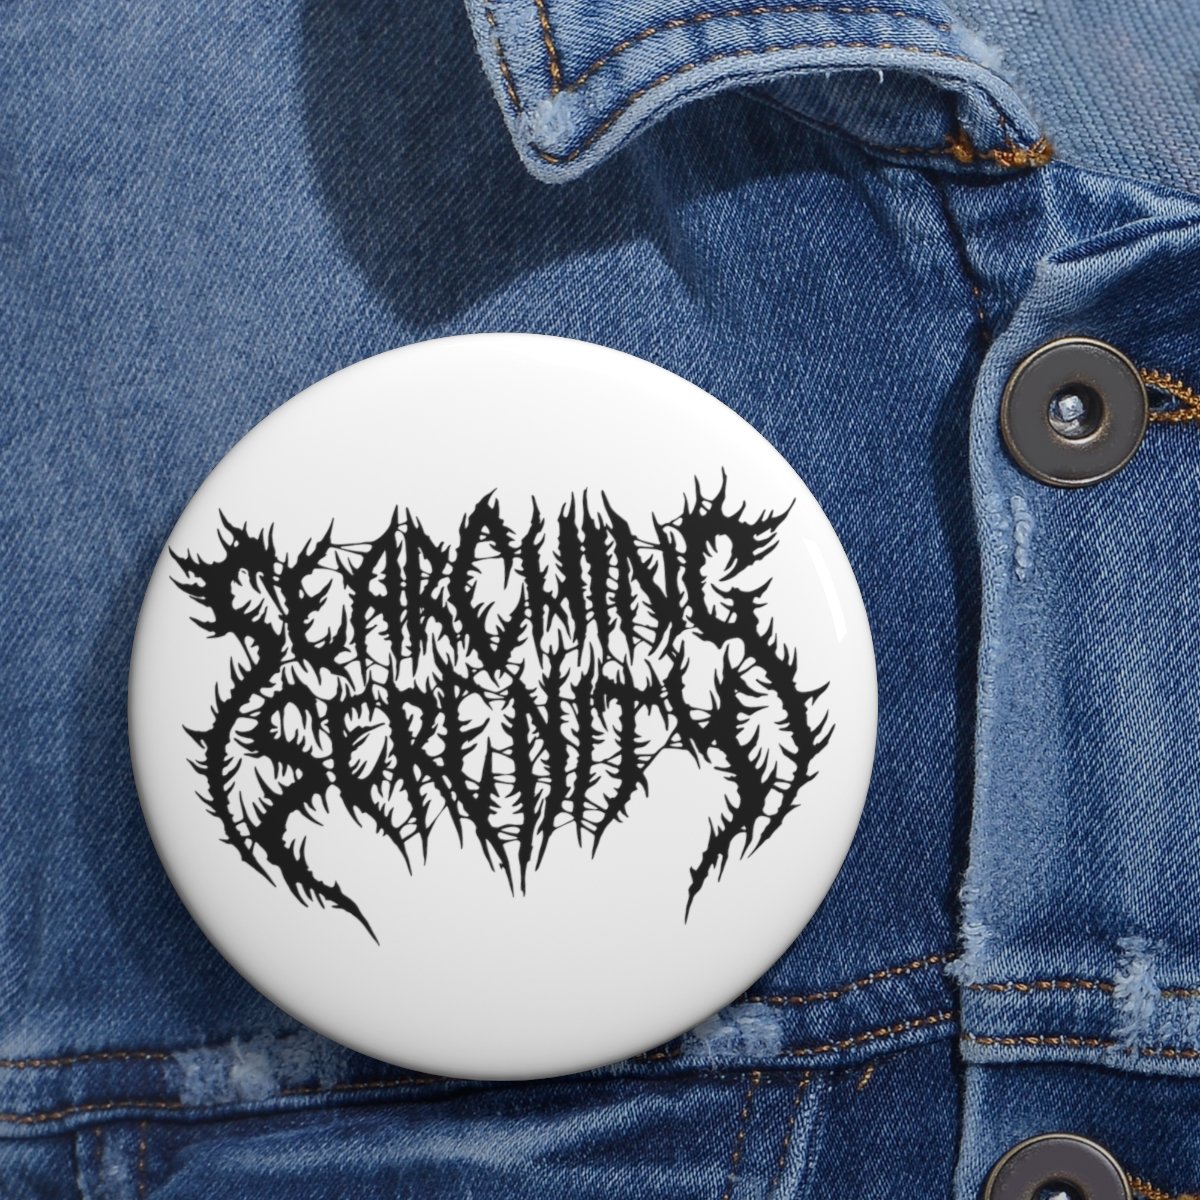 Searching Serenity – White Pin Buttons